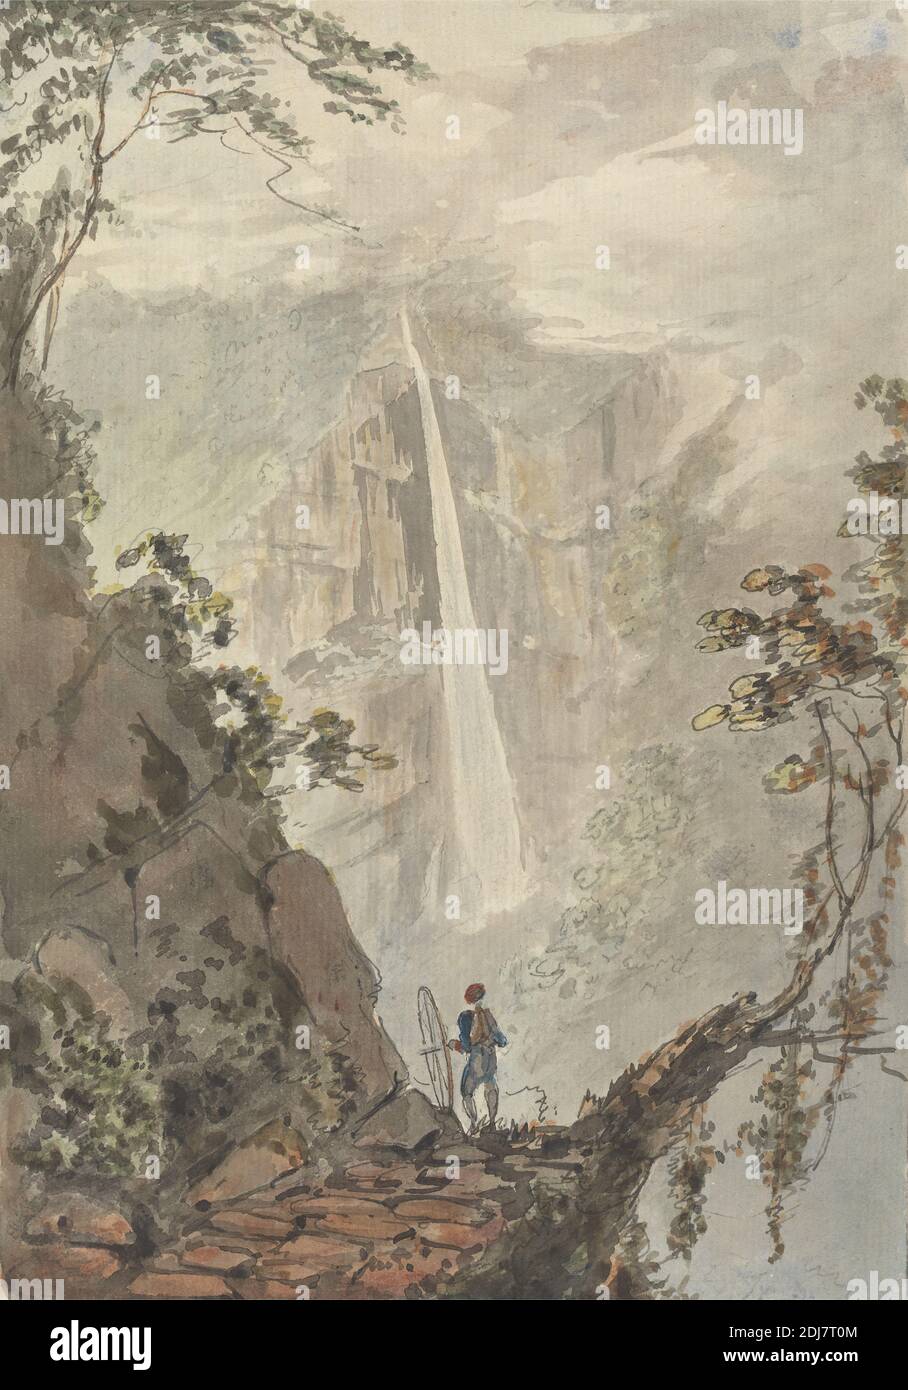 Murichom to Choka Chukha, Samuel Davis, 1757–1819, British, 1783, Watercolor and pen and black ink over graphite on medium, slightly textured, cream laid paper, Sheet: 10 × 6 7/8 inches (25.4 × 17.5 cm), cliff, figure, landscape, mountain, waterfall Stock Photo